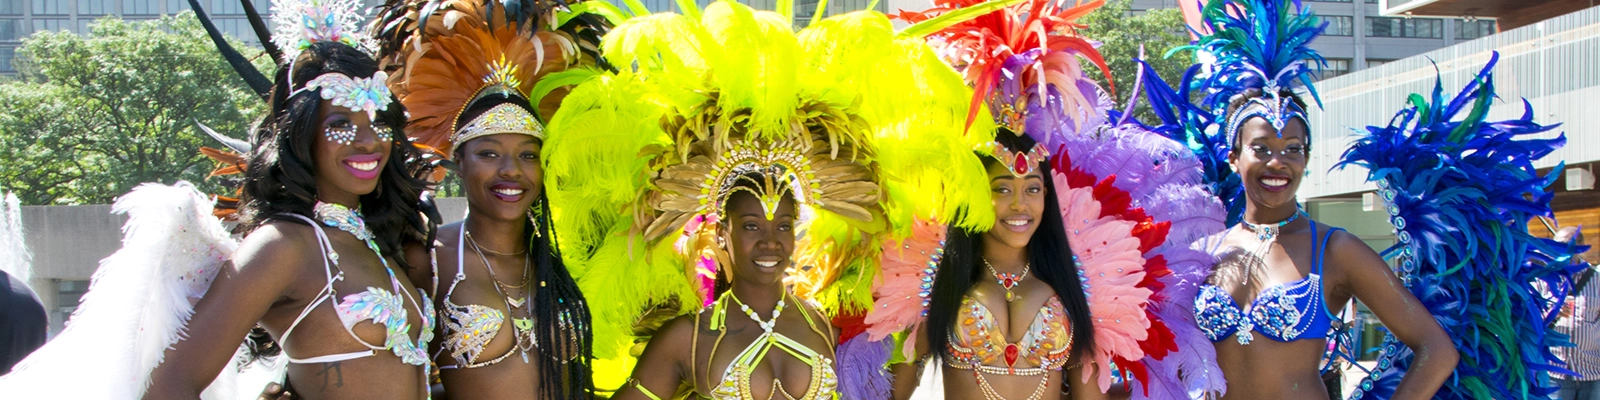 A vibrant Caribana celebration with people in colorful costumes enjoying the lively Caribbean festival atmosphere.